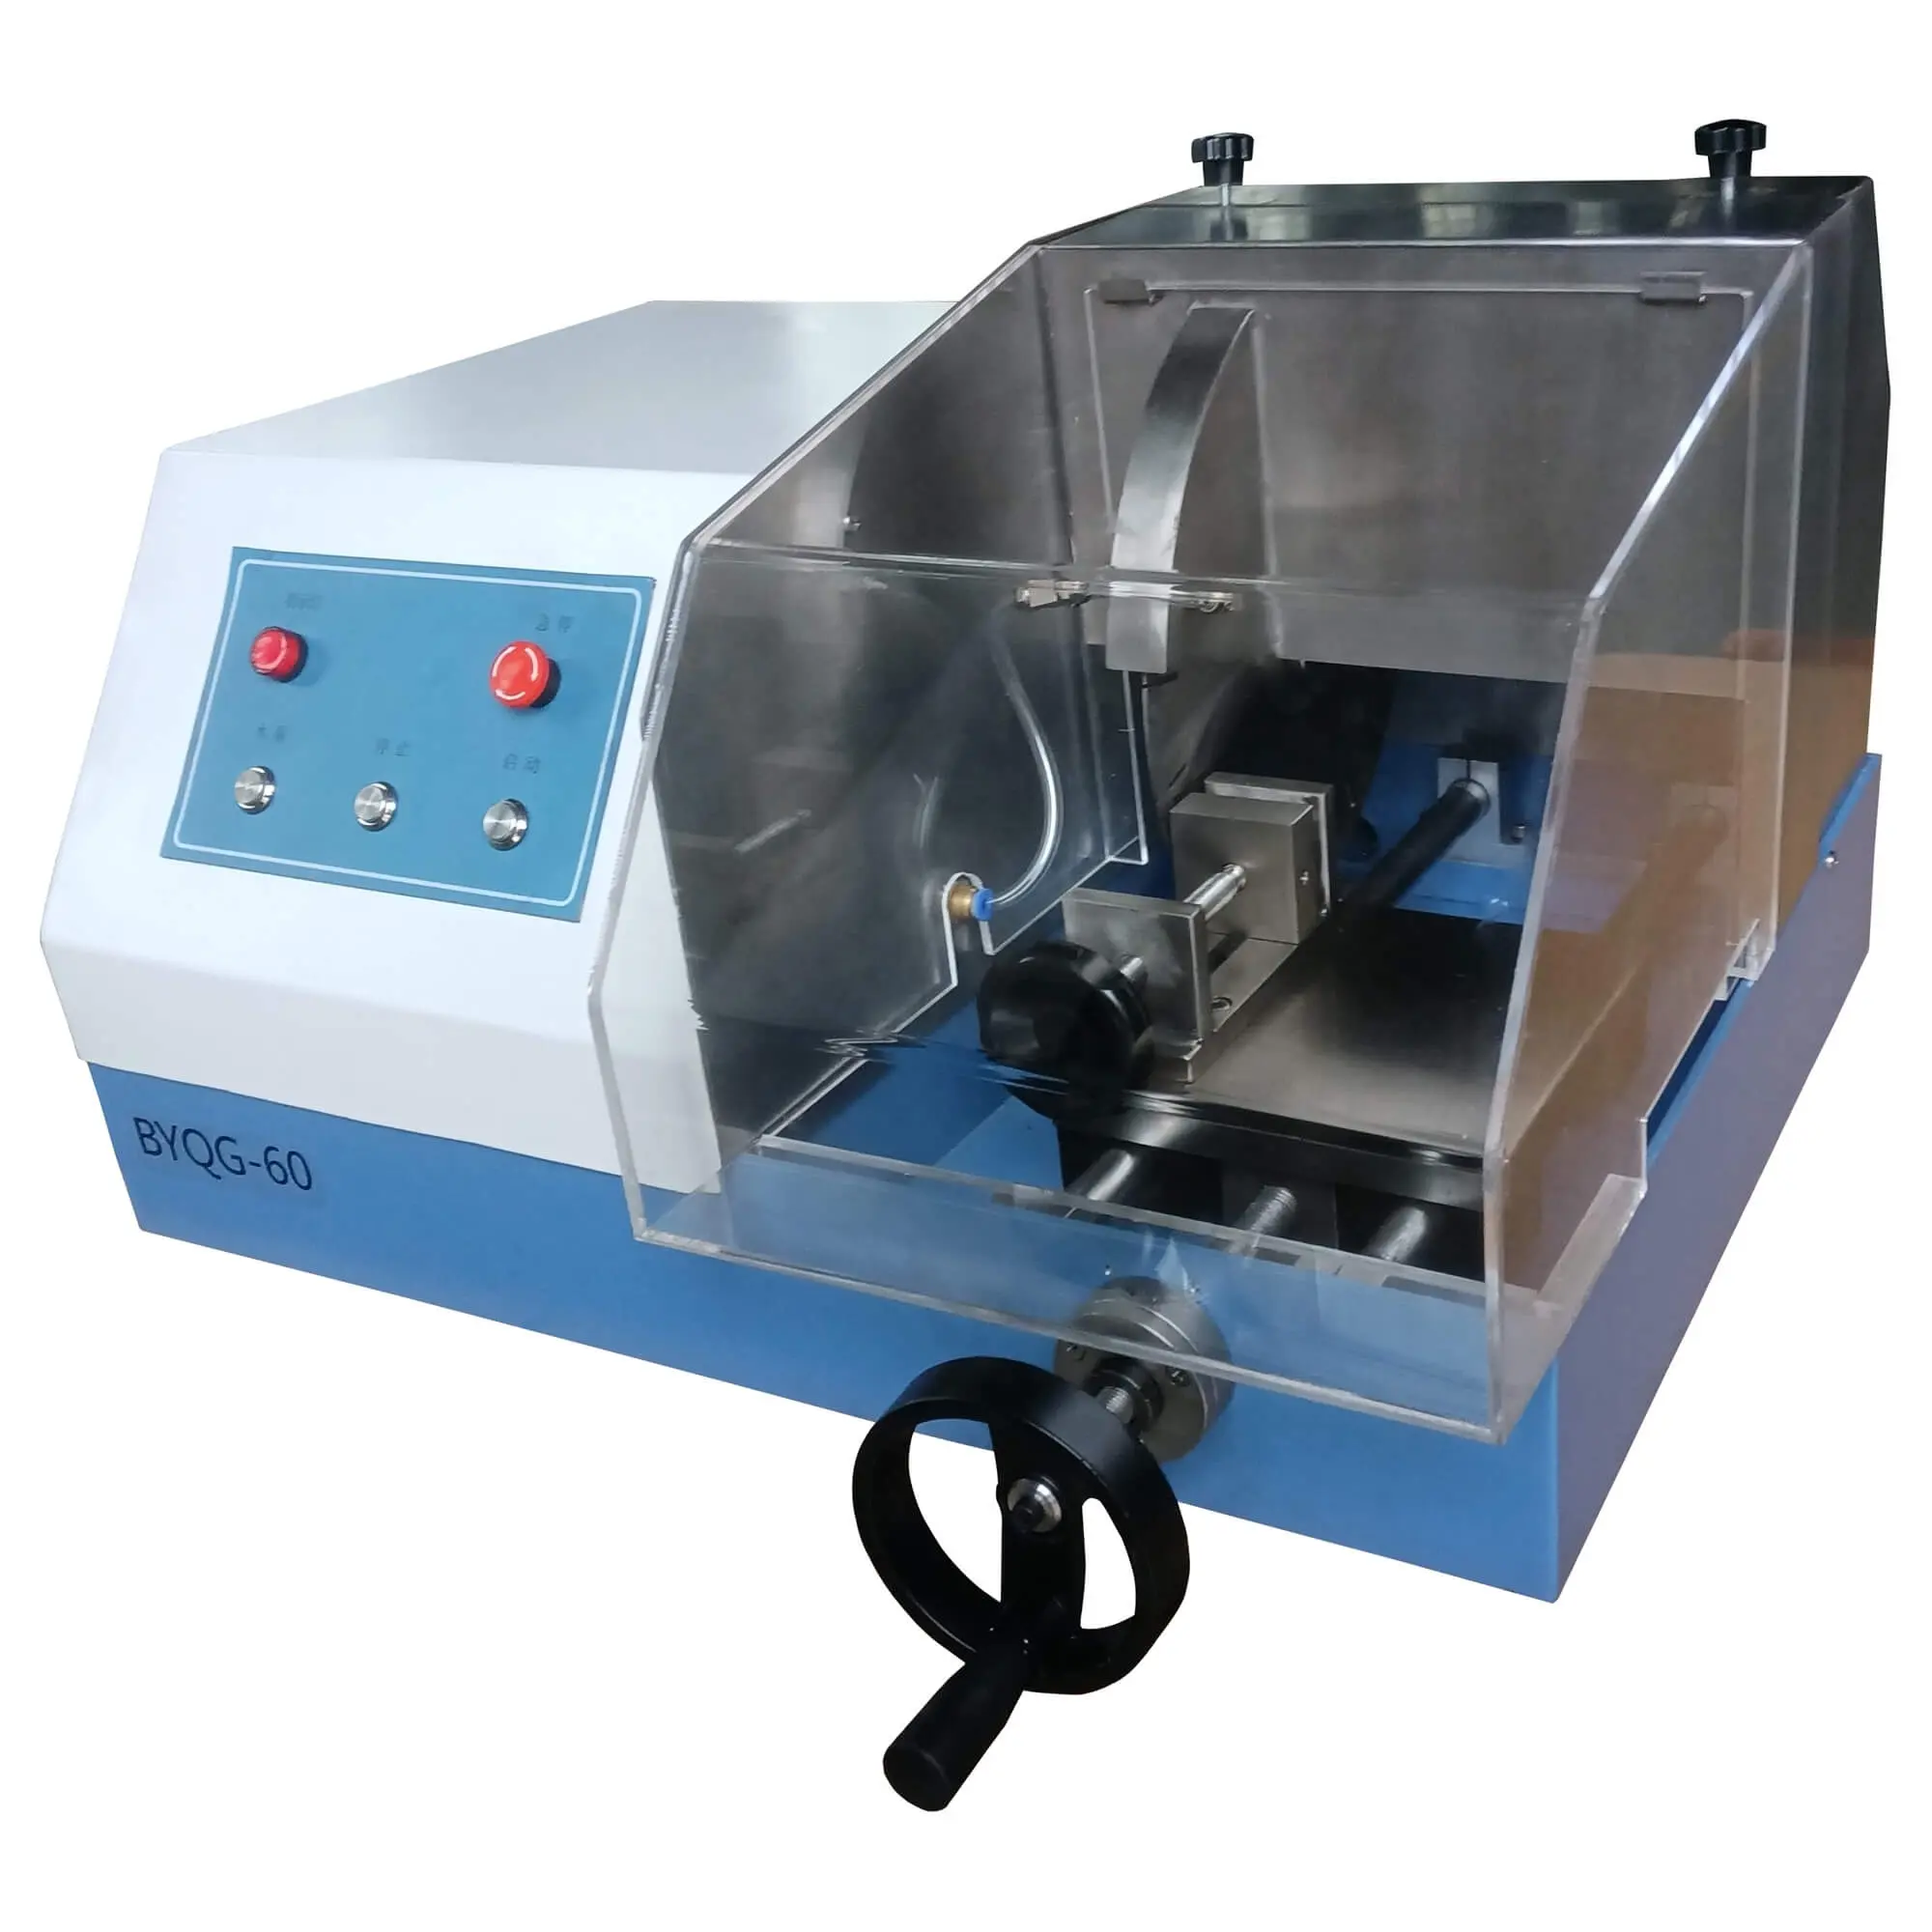 BYQG-60 Lithofacies Cutting Machine for Metallographic Sample Metal Sample Thin Section Equipment